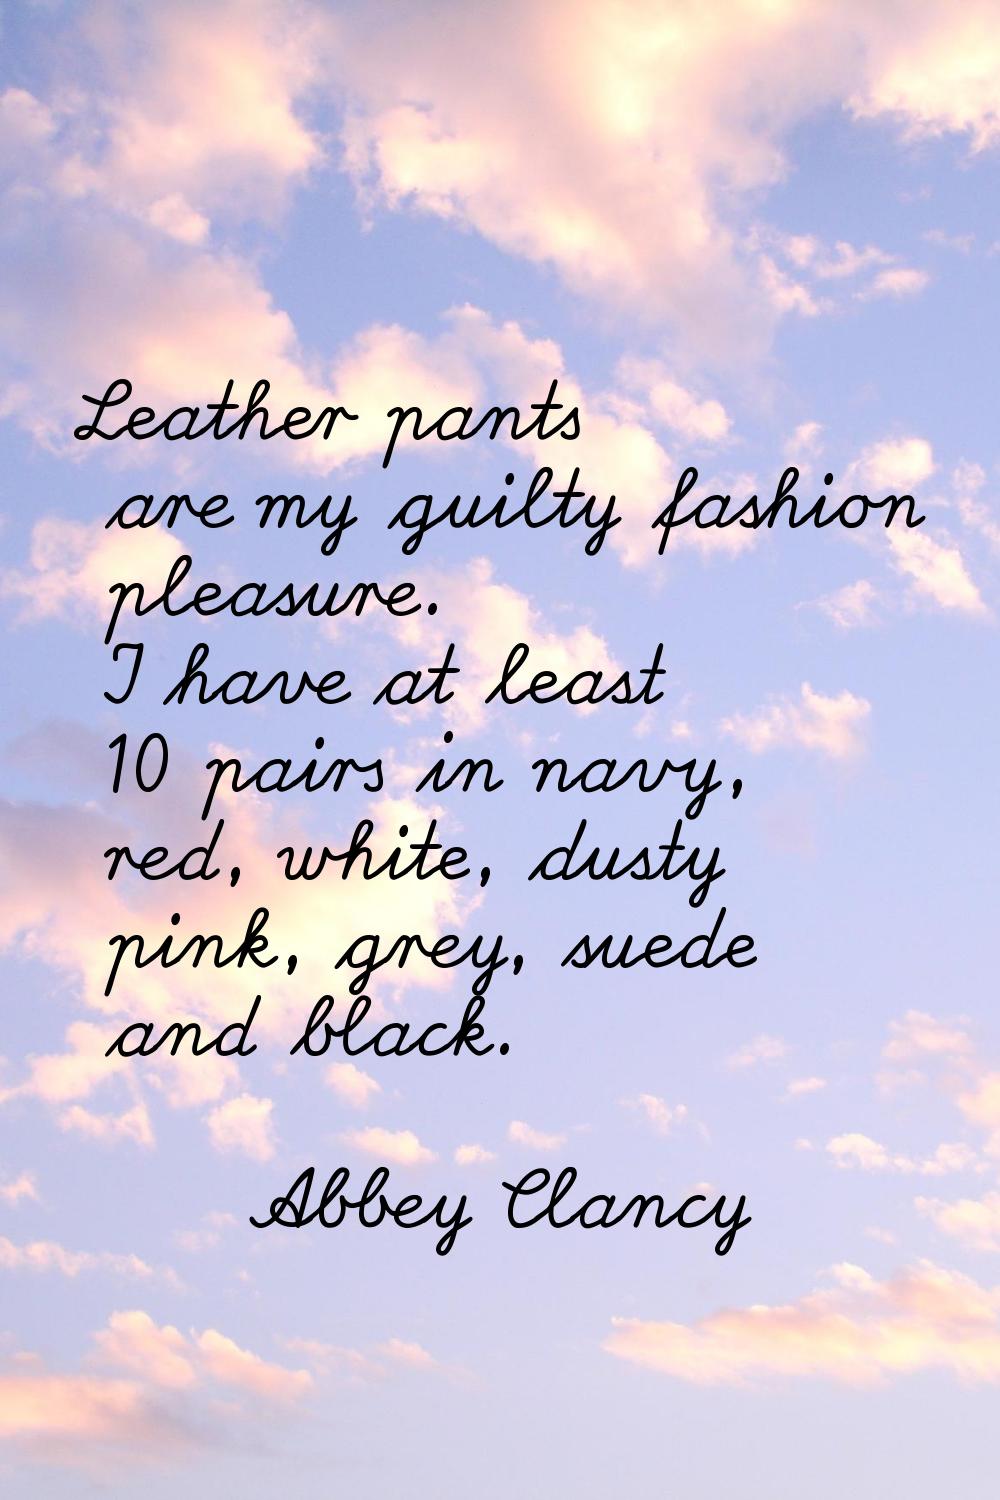 Leather pants are my guilty fashion pleasure. I have at least 10 pairs in navy, red, white, dusty p